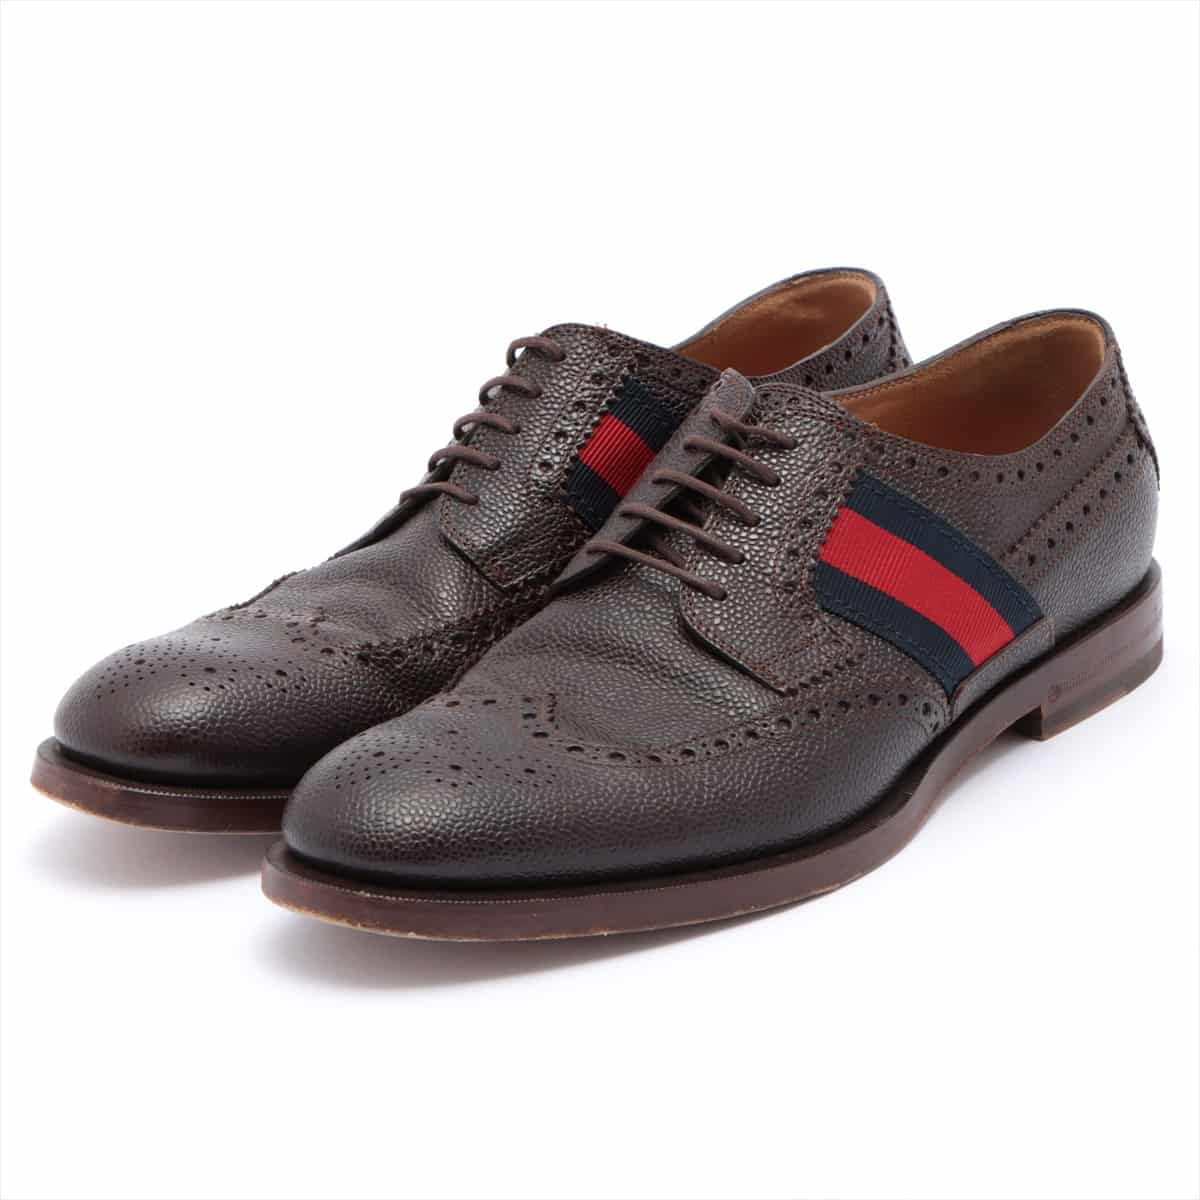 Gucci Sherry Line Leather Leather shoes 9 Men's Brown wingtip